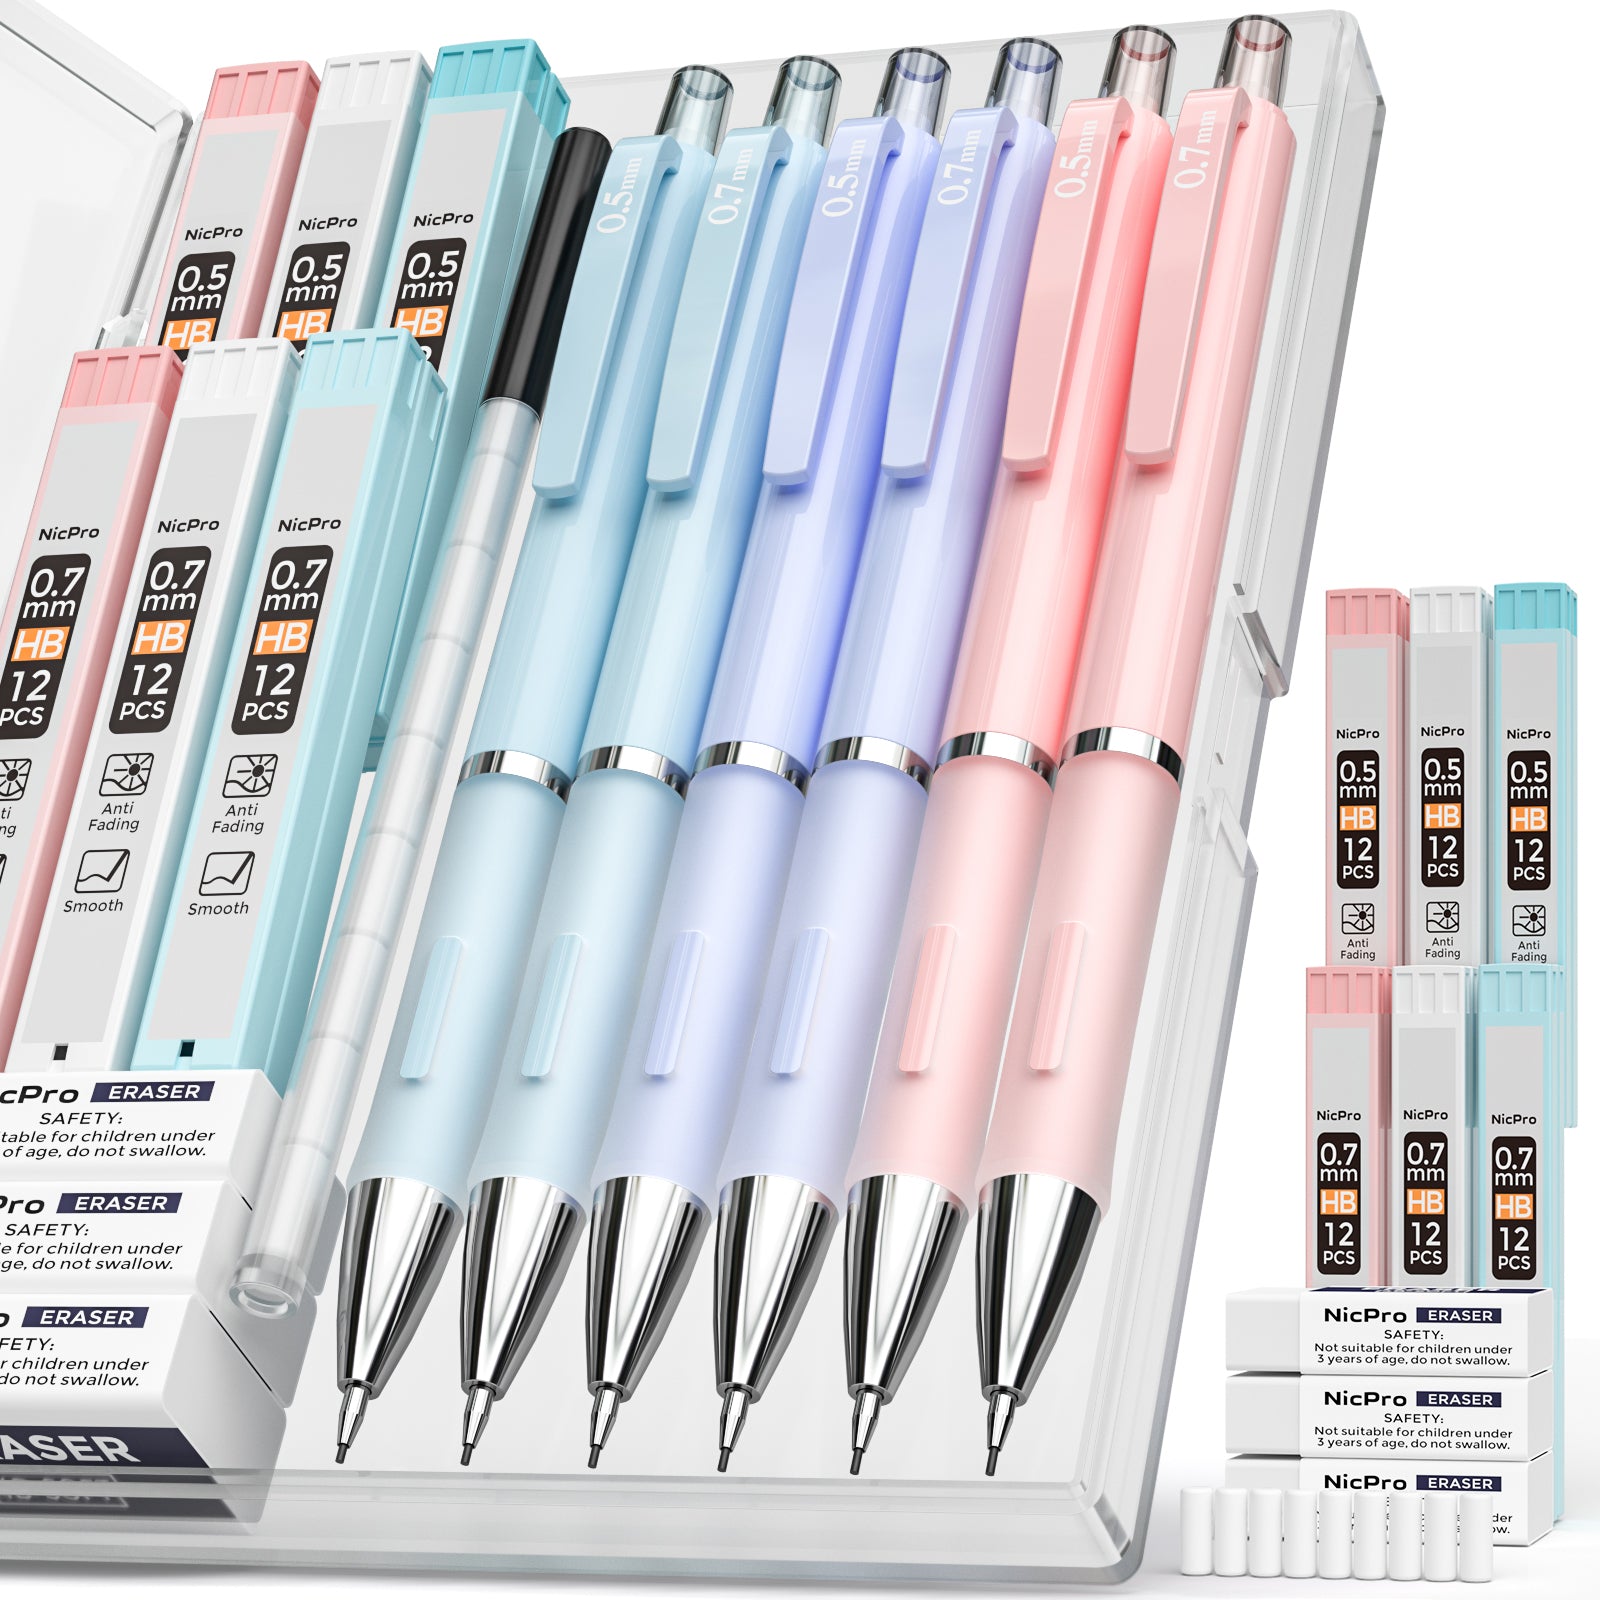 Nicpro 6 PCS Pastel Mechanical Pencil 0.5 & 0.7 mm for School, with 12 tubes HB Lead Refills, Erasers, Eraser Refills For Student Writing, Drawing, Sketching, Blue & Pink & violet Colors - with Case